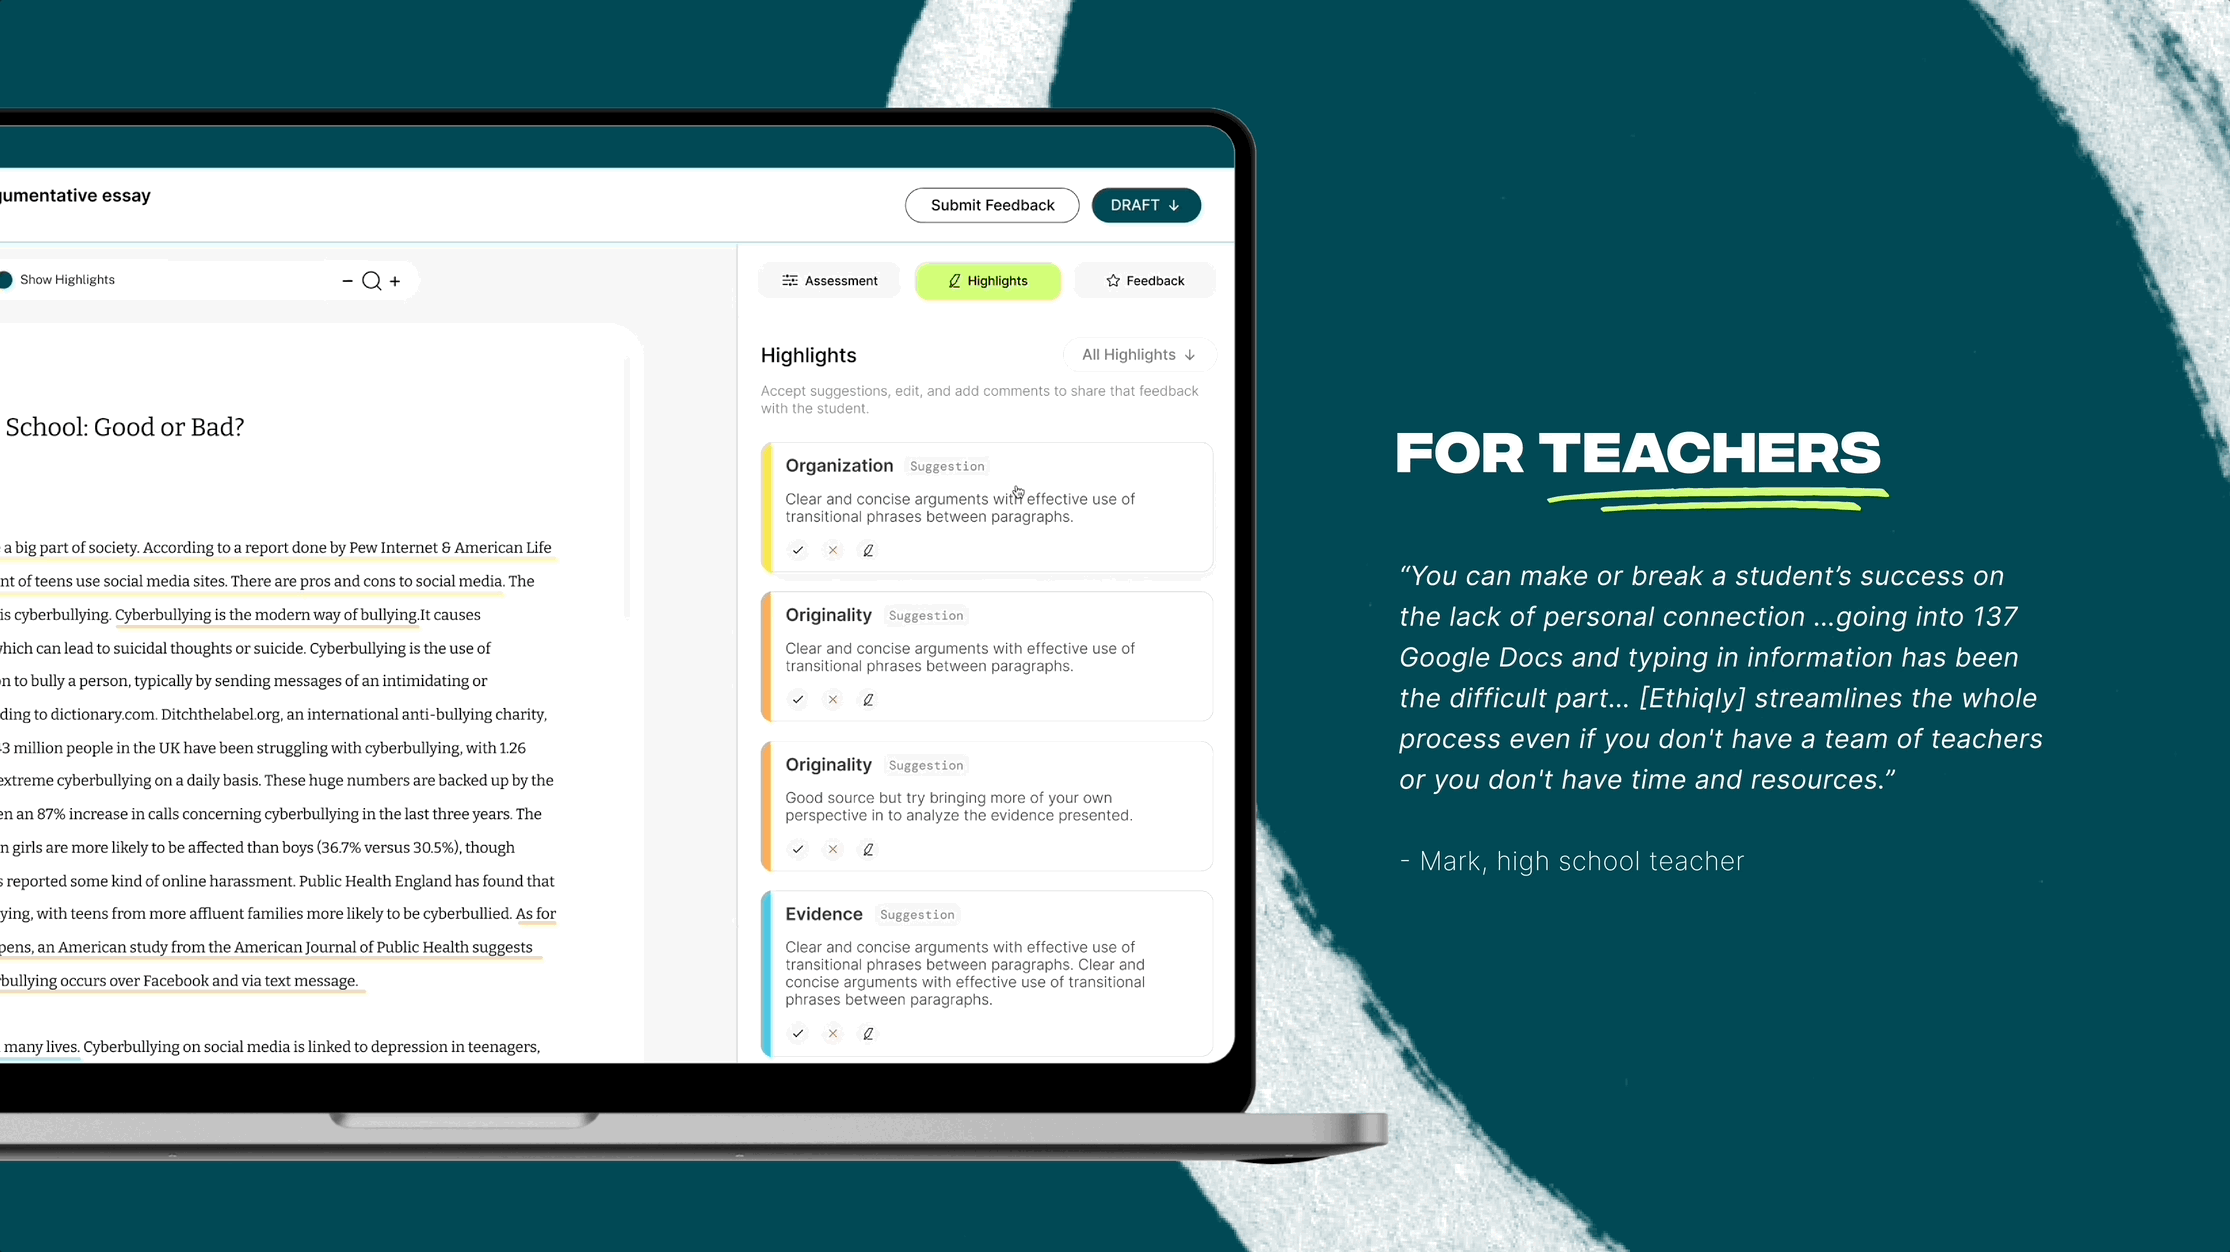 A screenrecording of the AI suggestions feature for teachers in Ethiqly.